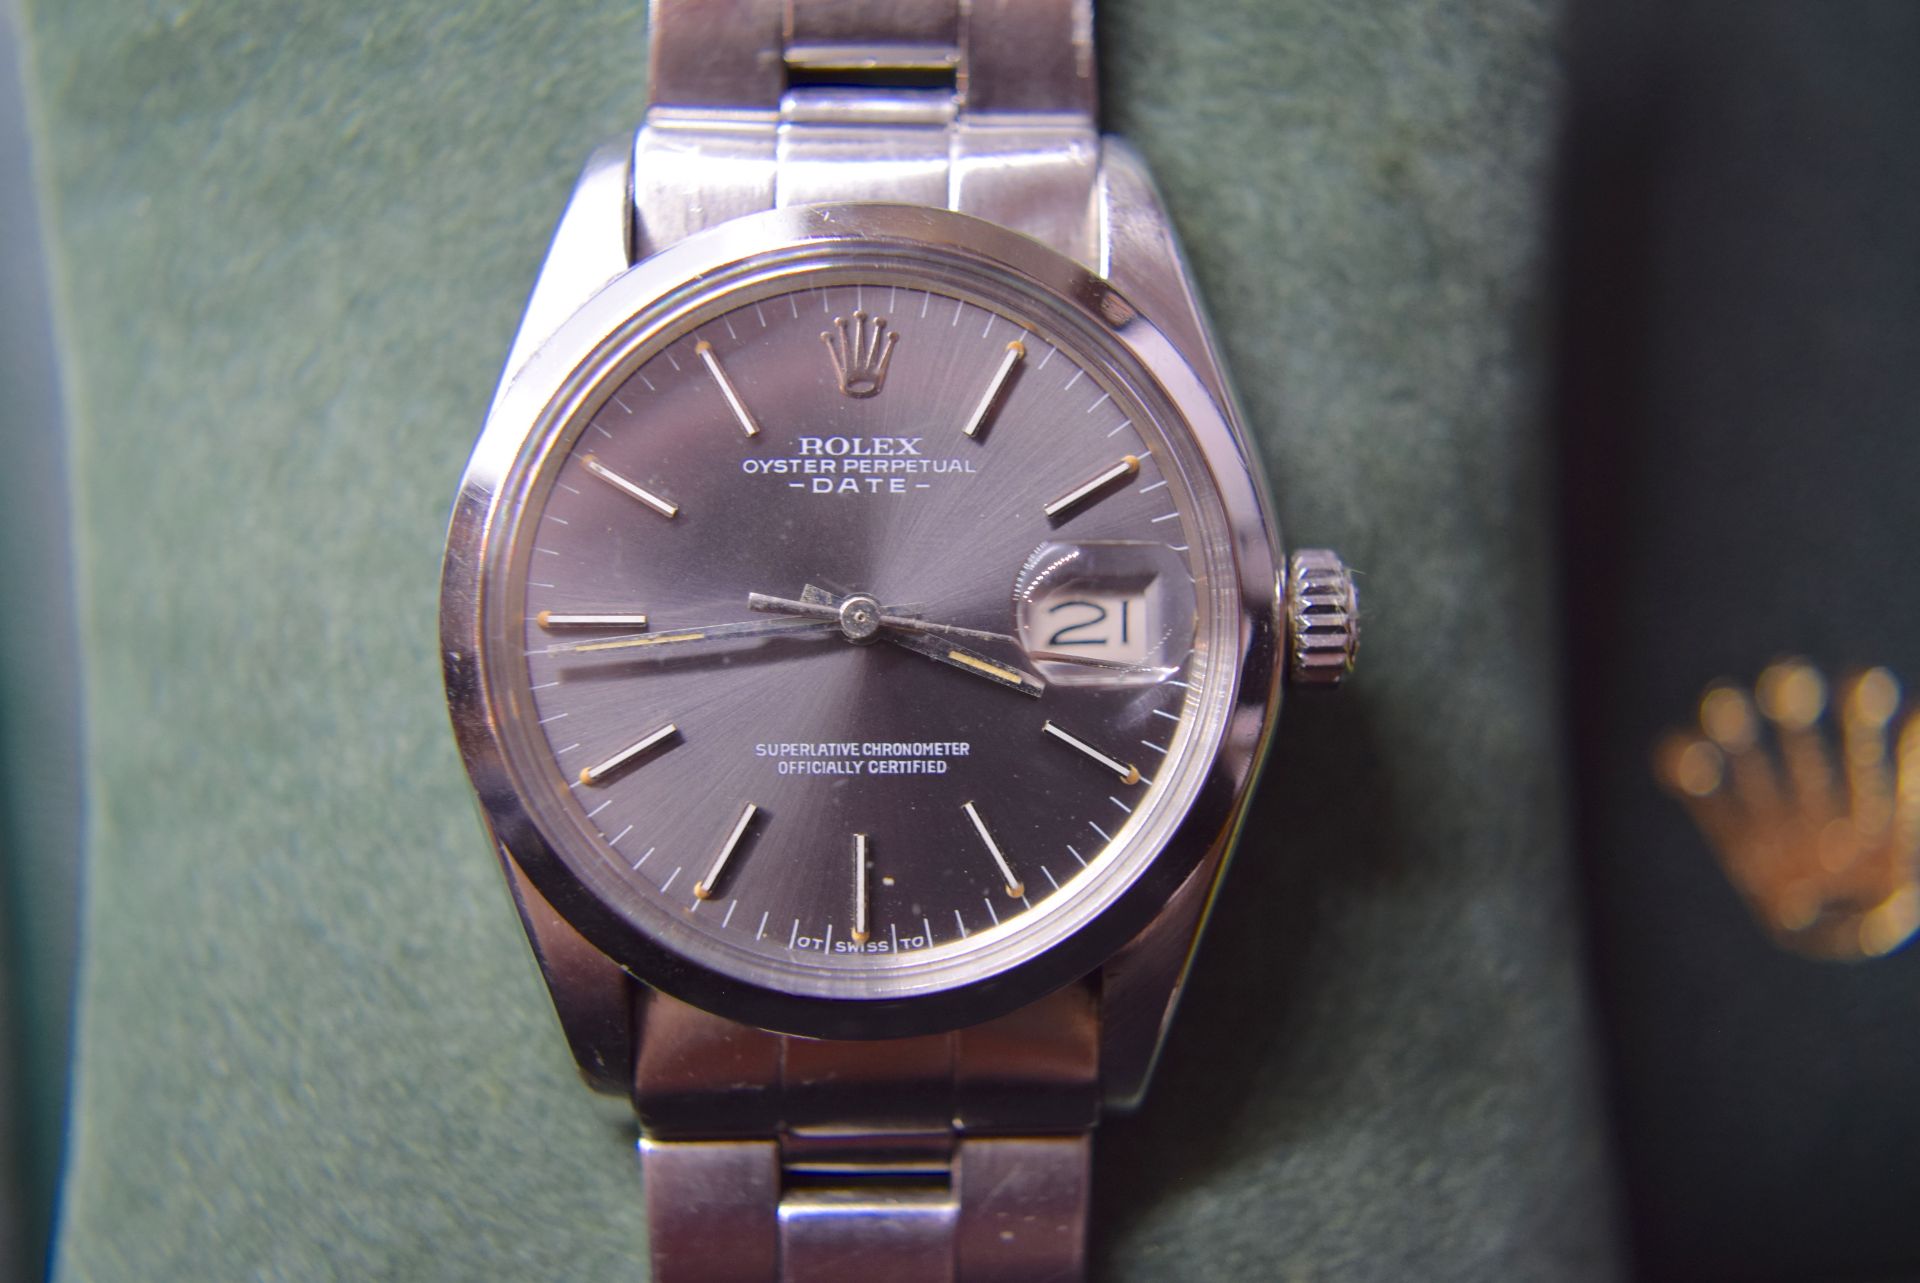 ROLEX OYSTER PERPETUAL DATE GENTS 34MM / GREY DIAL